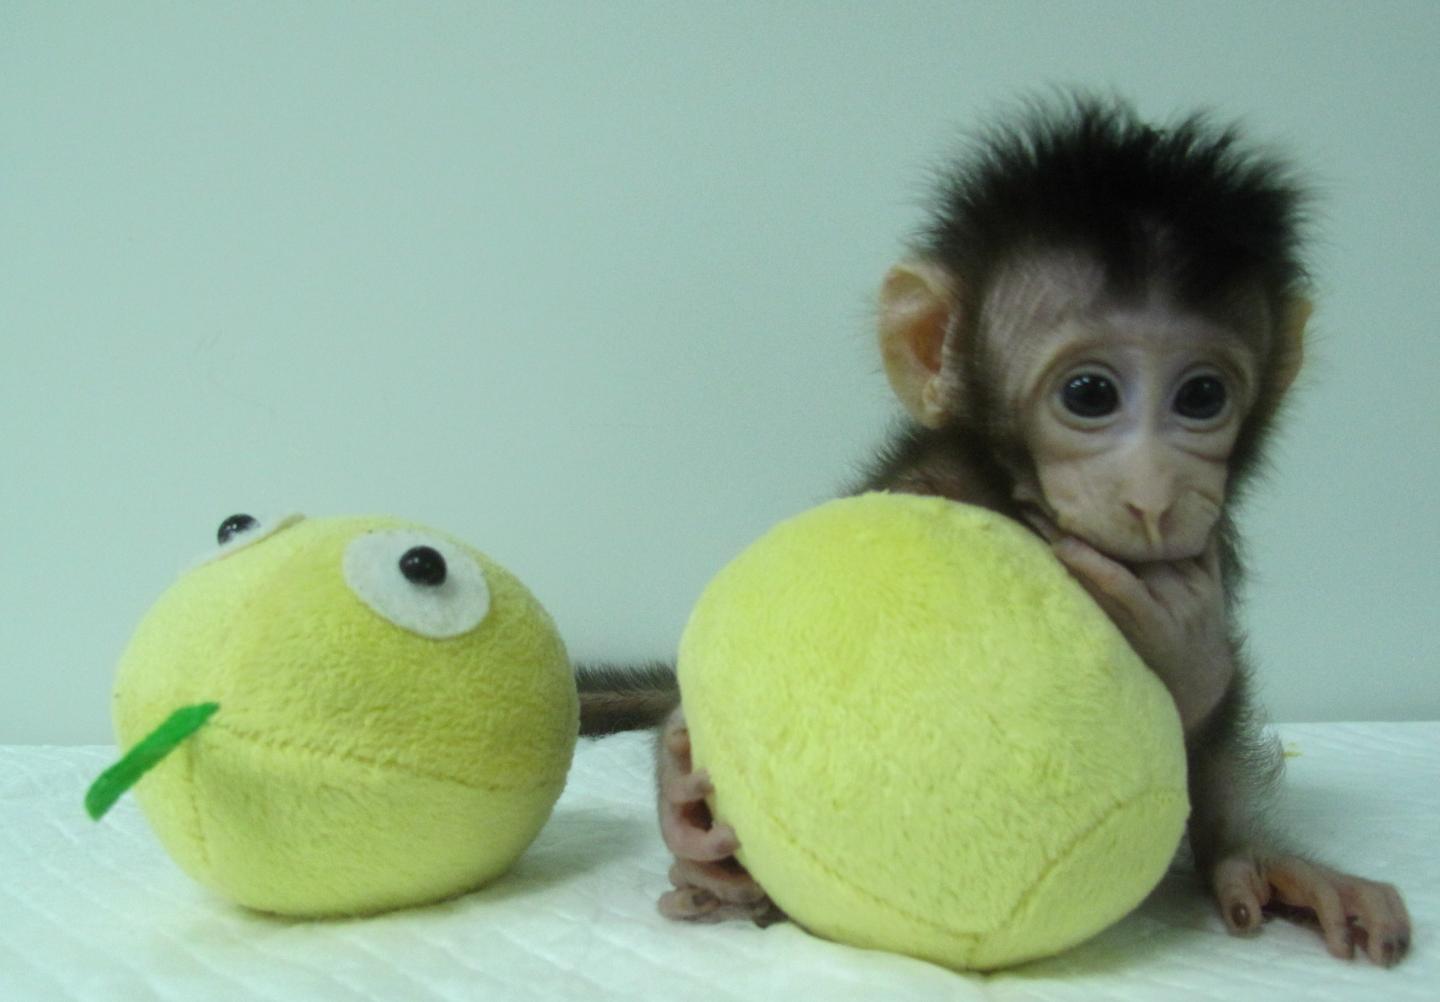 Hua Hua, one of the first monkey clones made by somatic cell nuclear transfer. [Qiang Sun and Mu-ming Poo / Chinese Academy of Sciences]